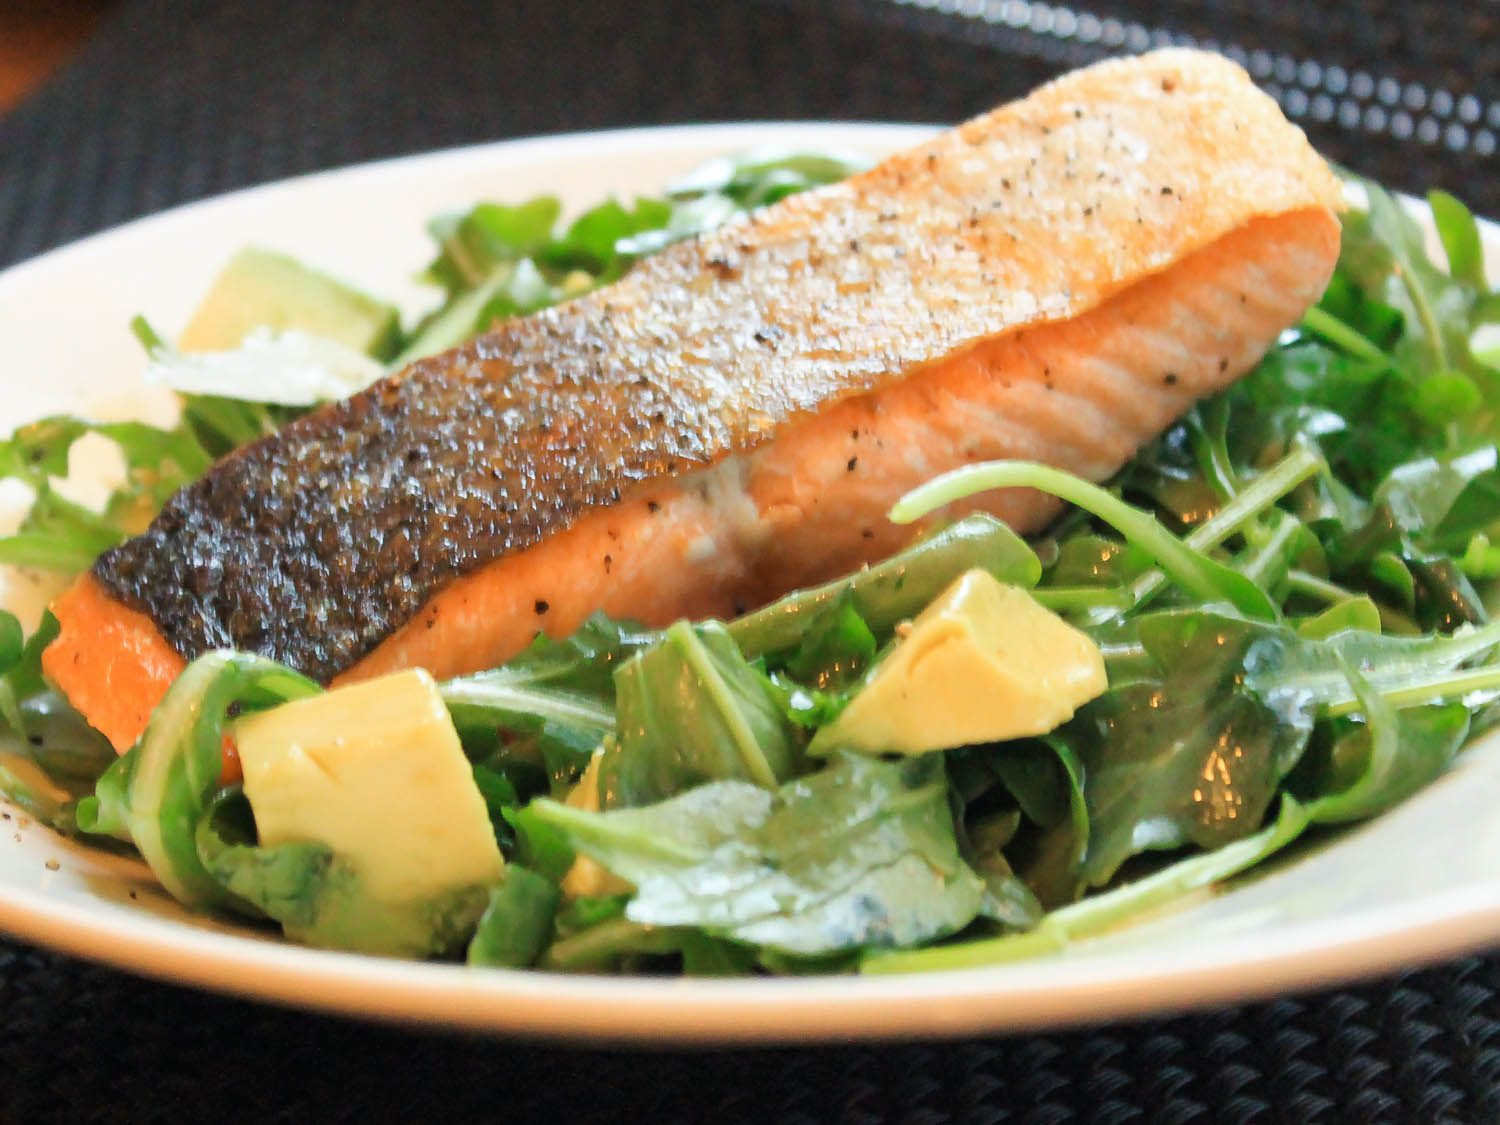 Salmon and Salad Unique 10 Minute Dinner Salmon with Arugula and Avocado Salad